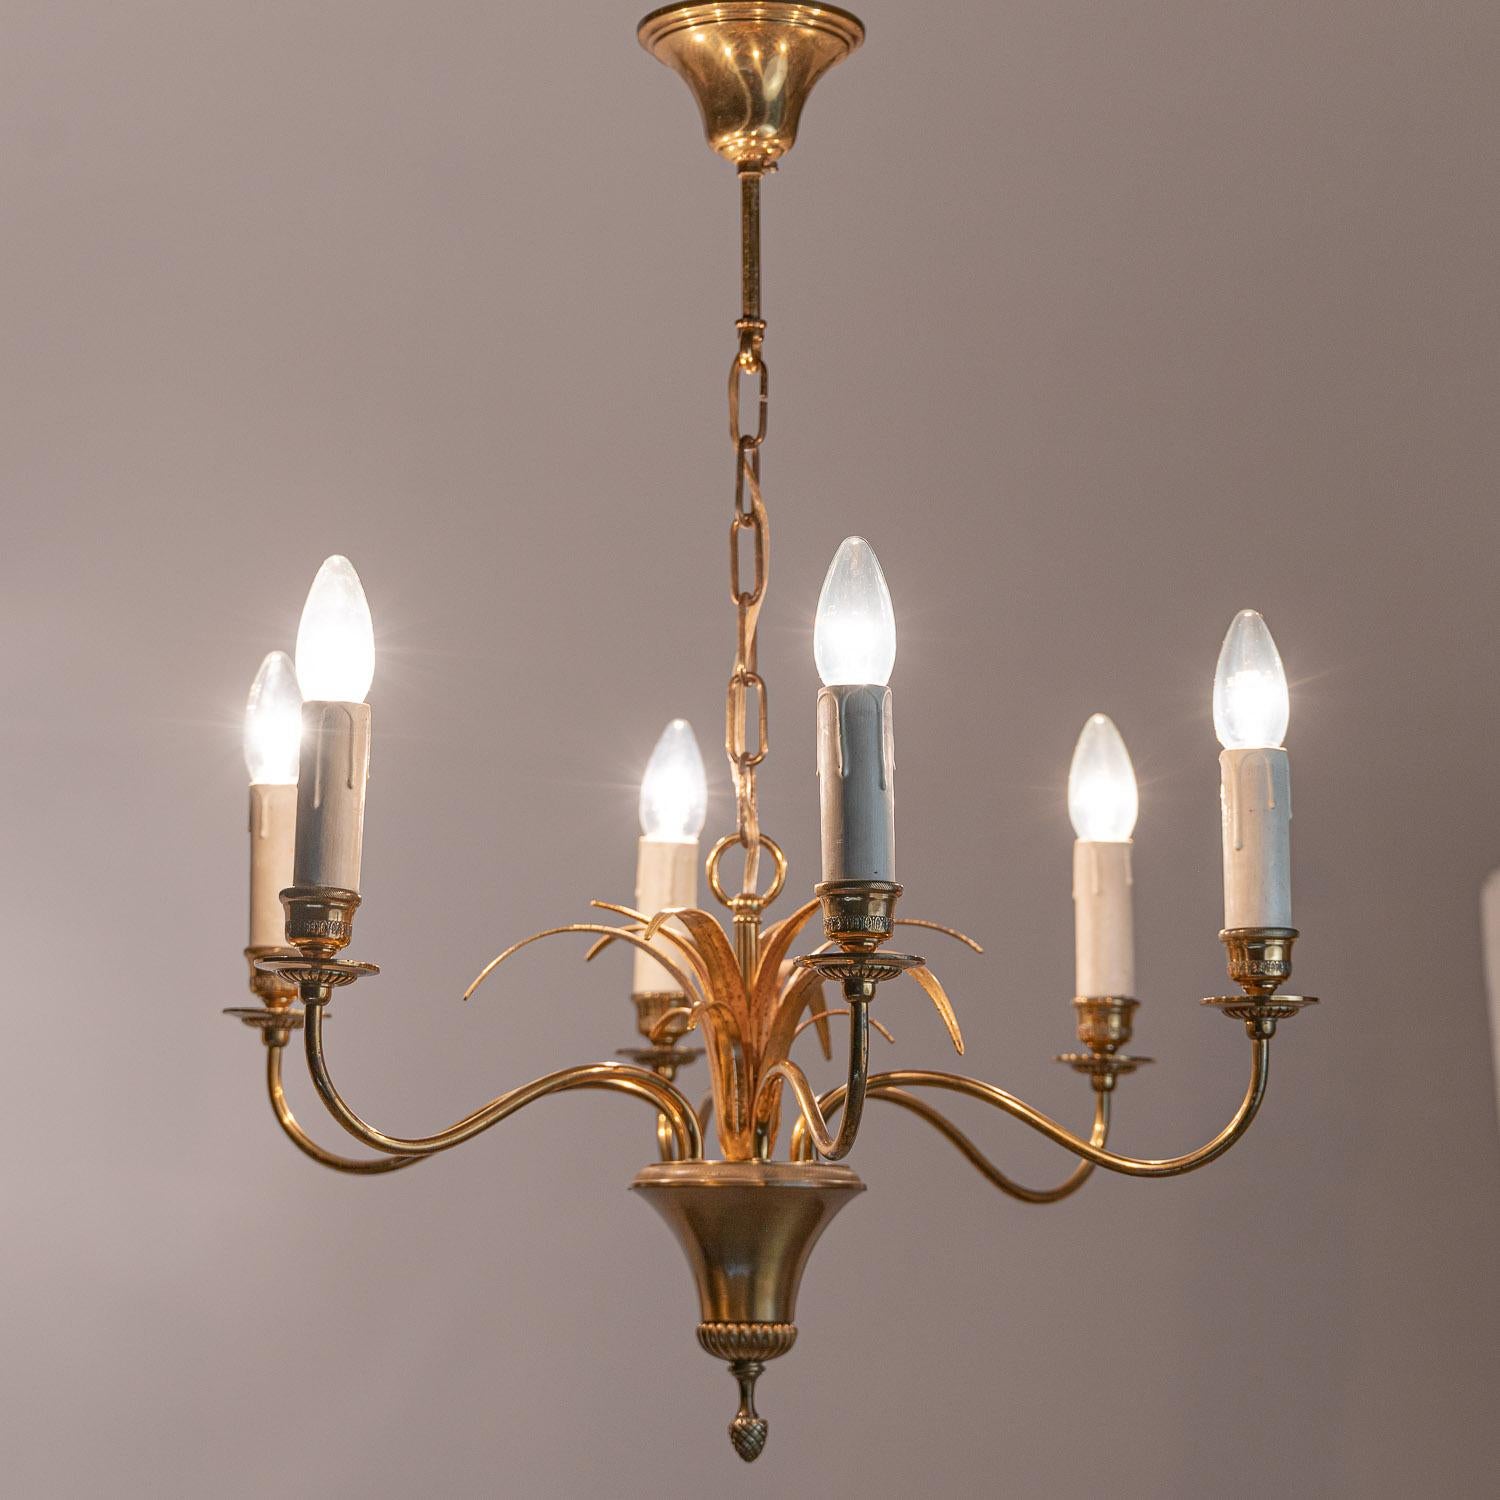 1970’s Brass Chandelier In style of Maison Charles For Sale 1